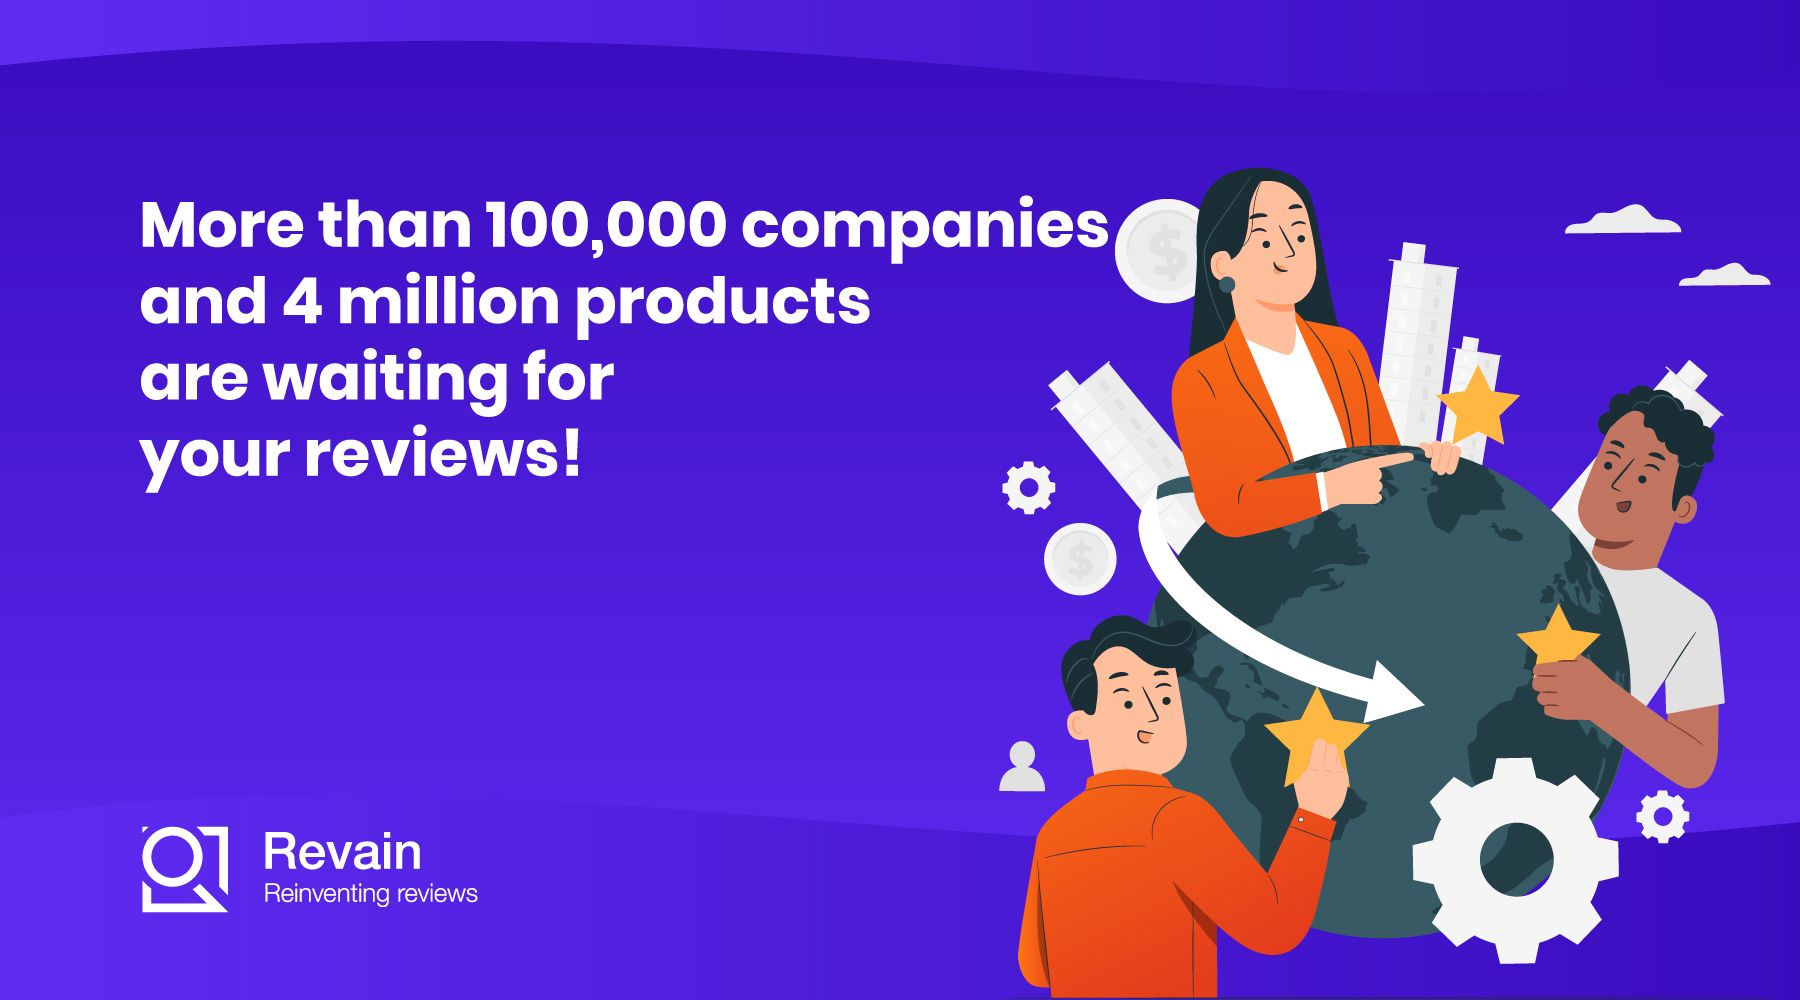 Article More than 100,000 companies and 4 million products are waiting for your reviews!